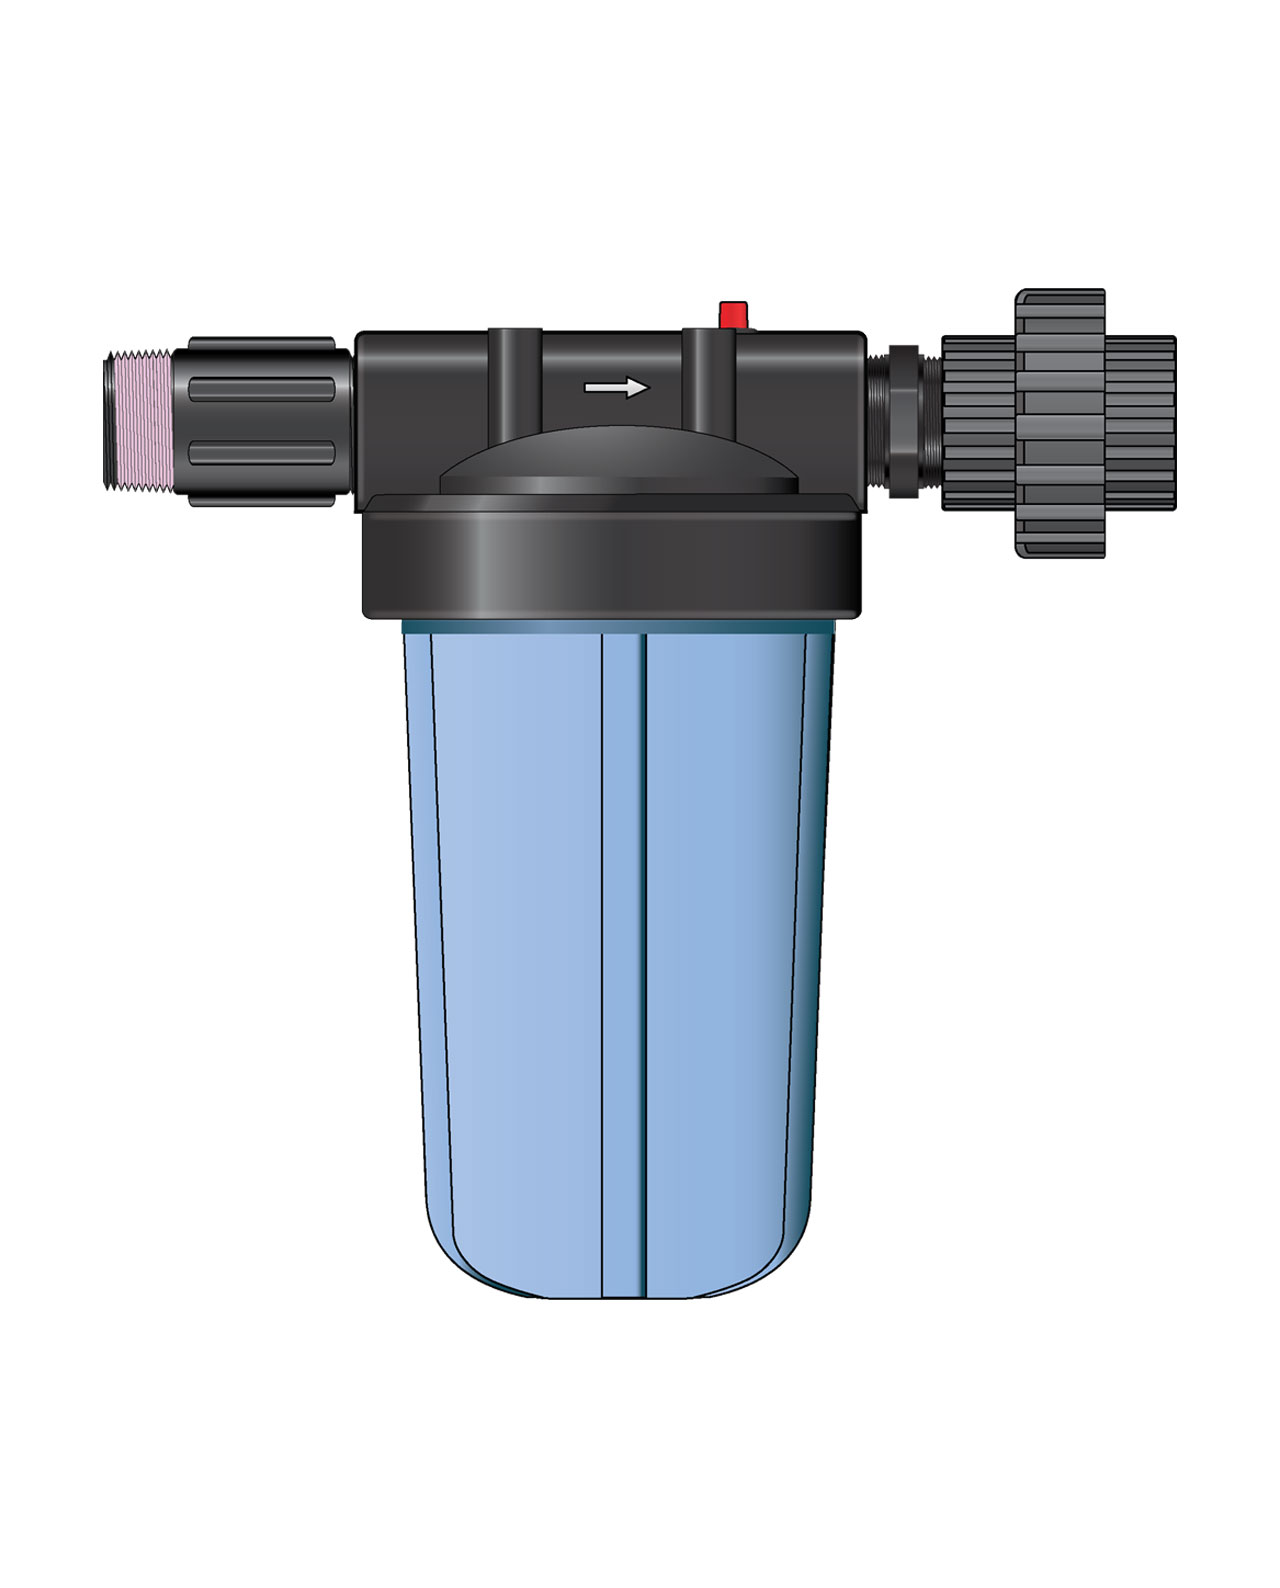 Hi-Flo Mixing Chamber Kit - Water-Powered Nutrient Delivery System